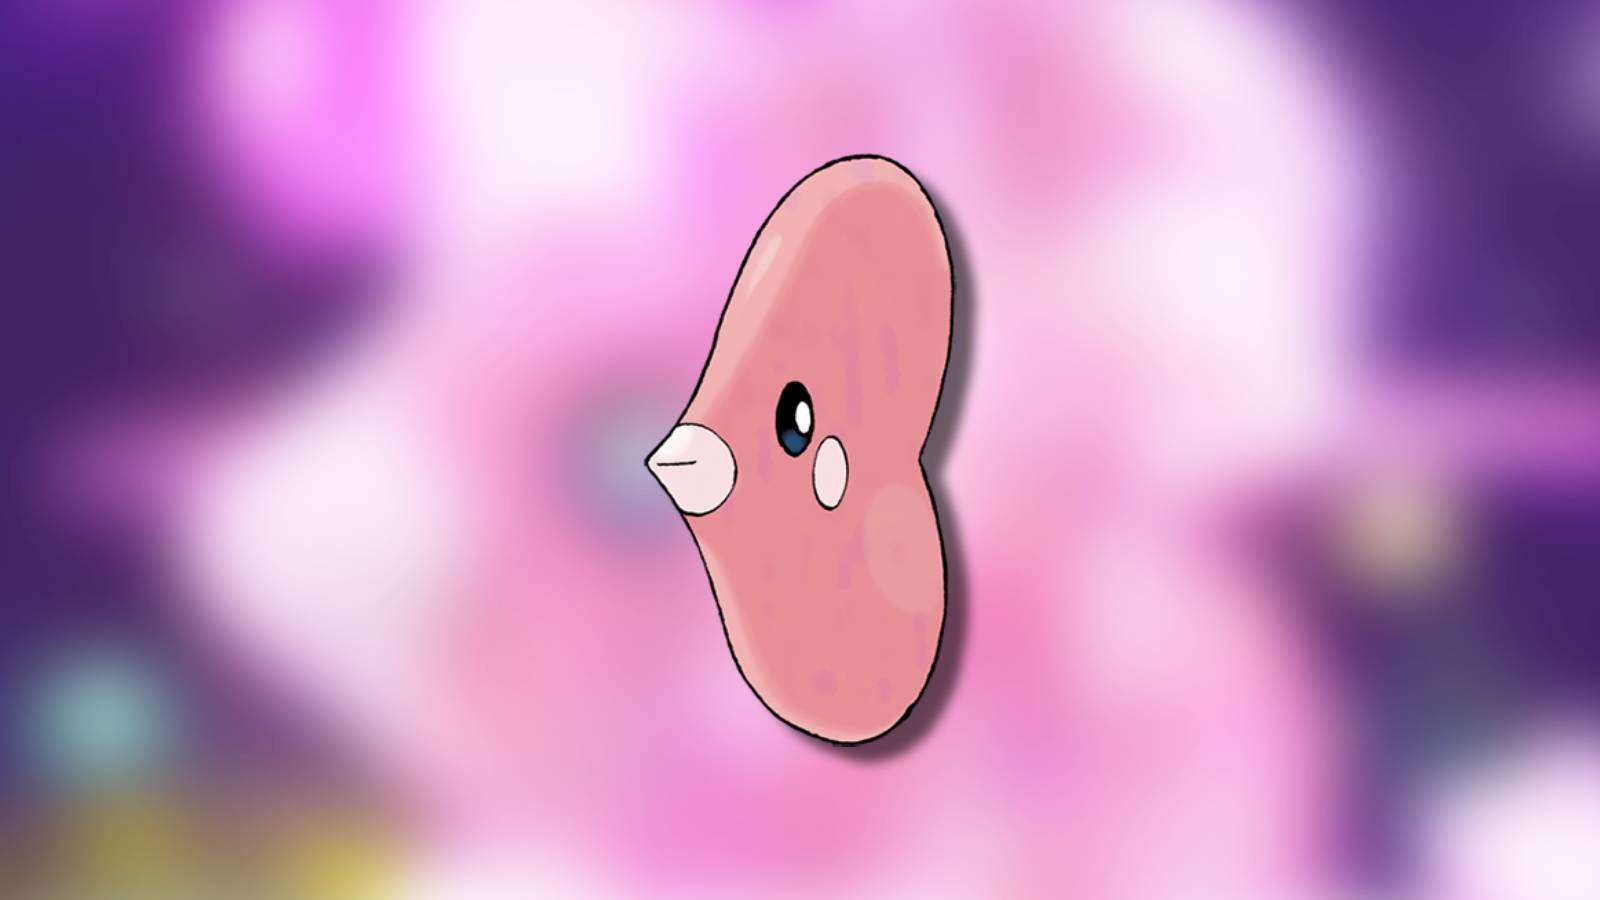 The Pokemon Luvdisc appears against a blurred background